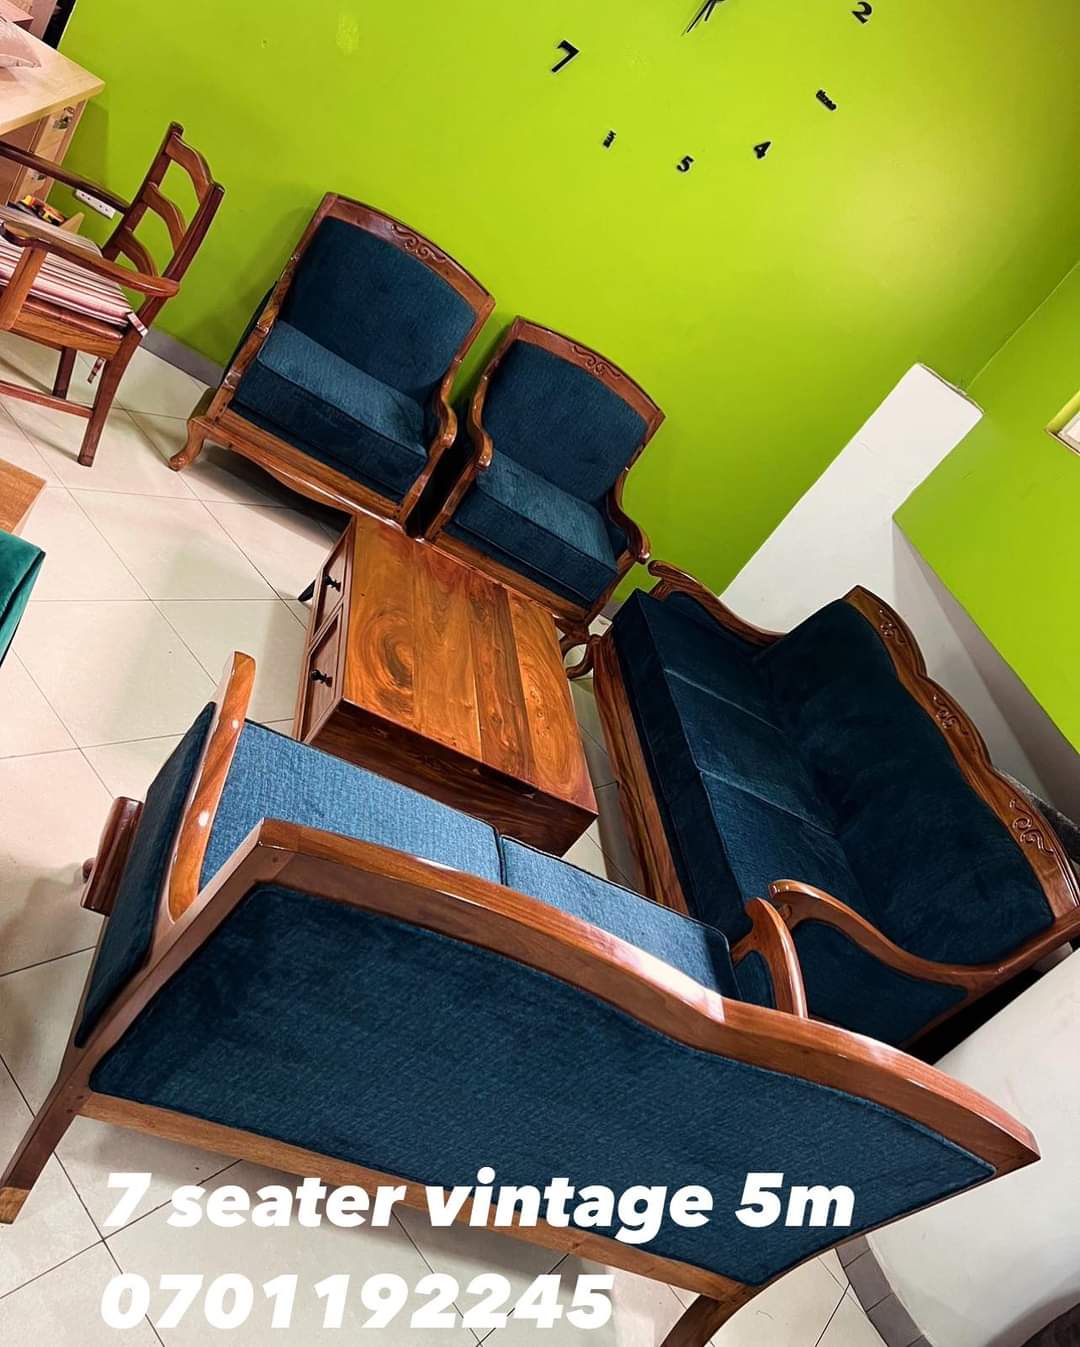 7 seater vintage chair